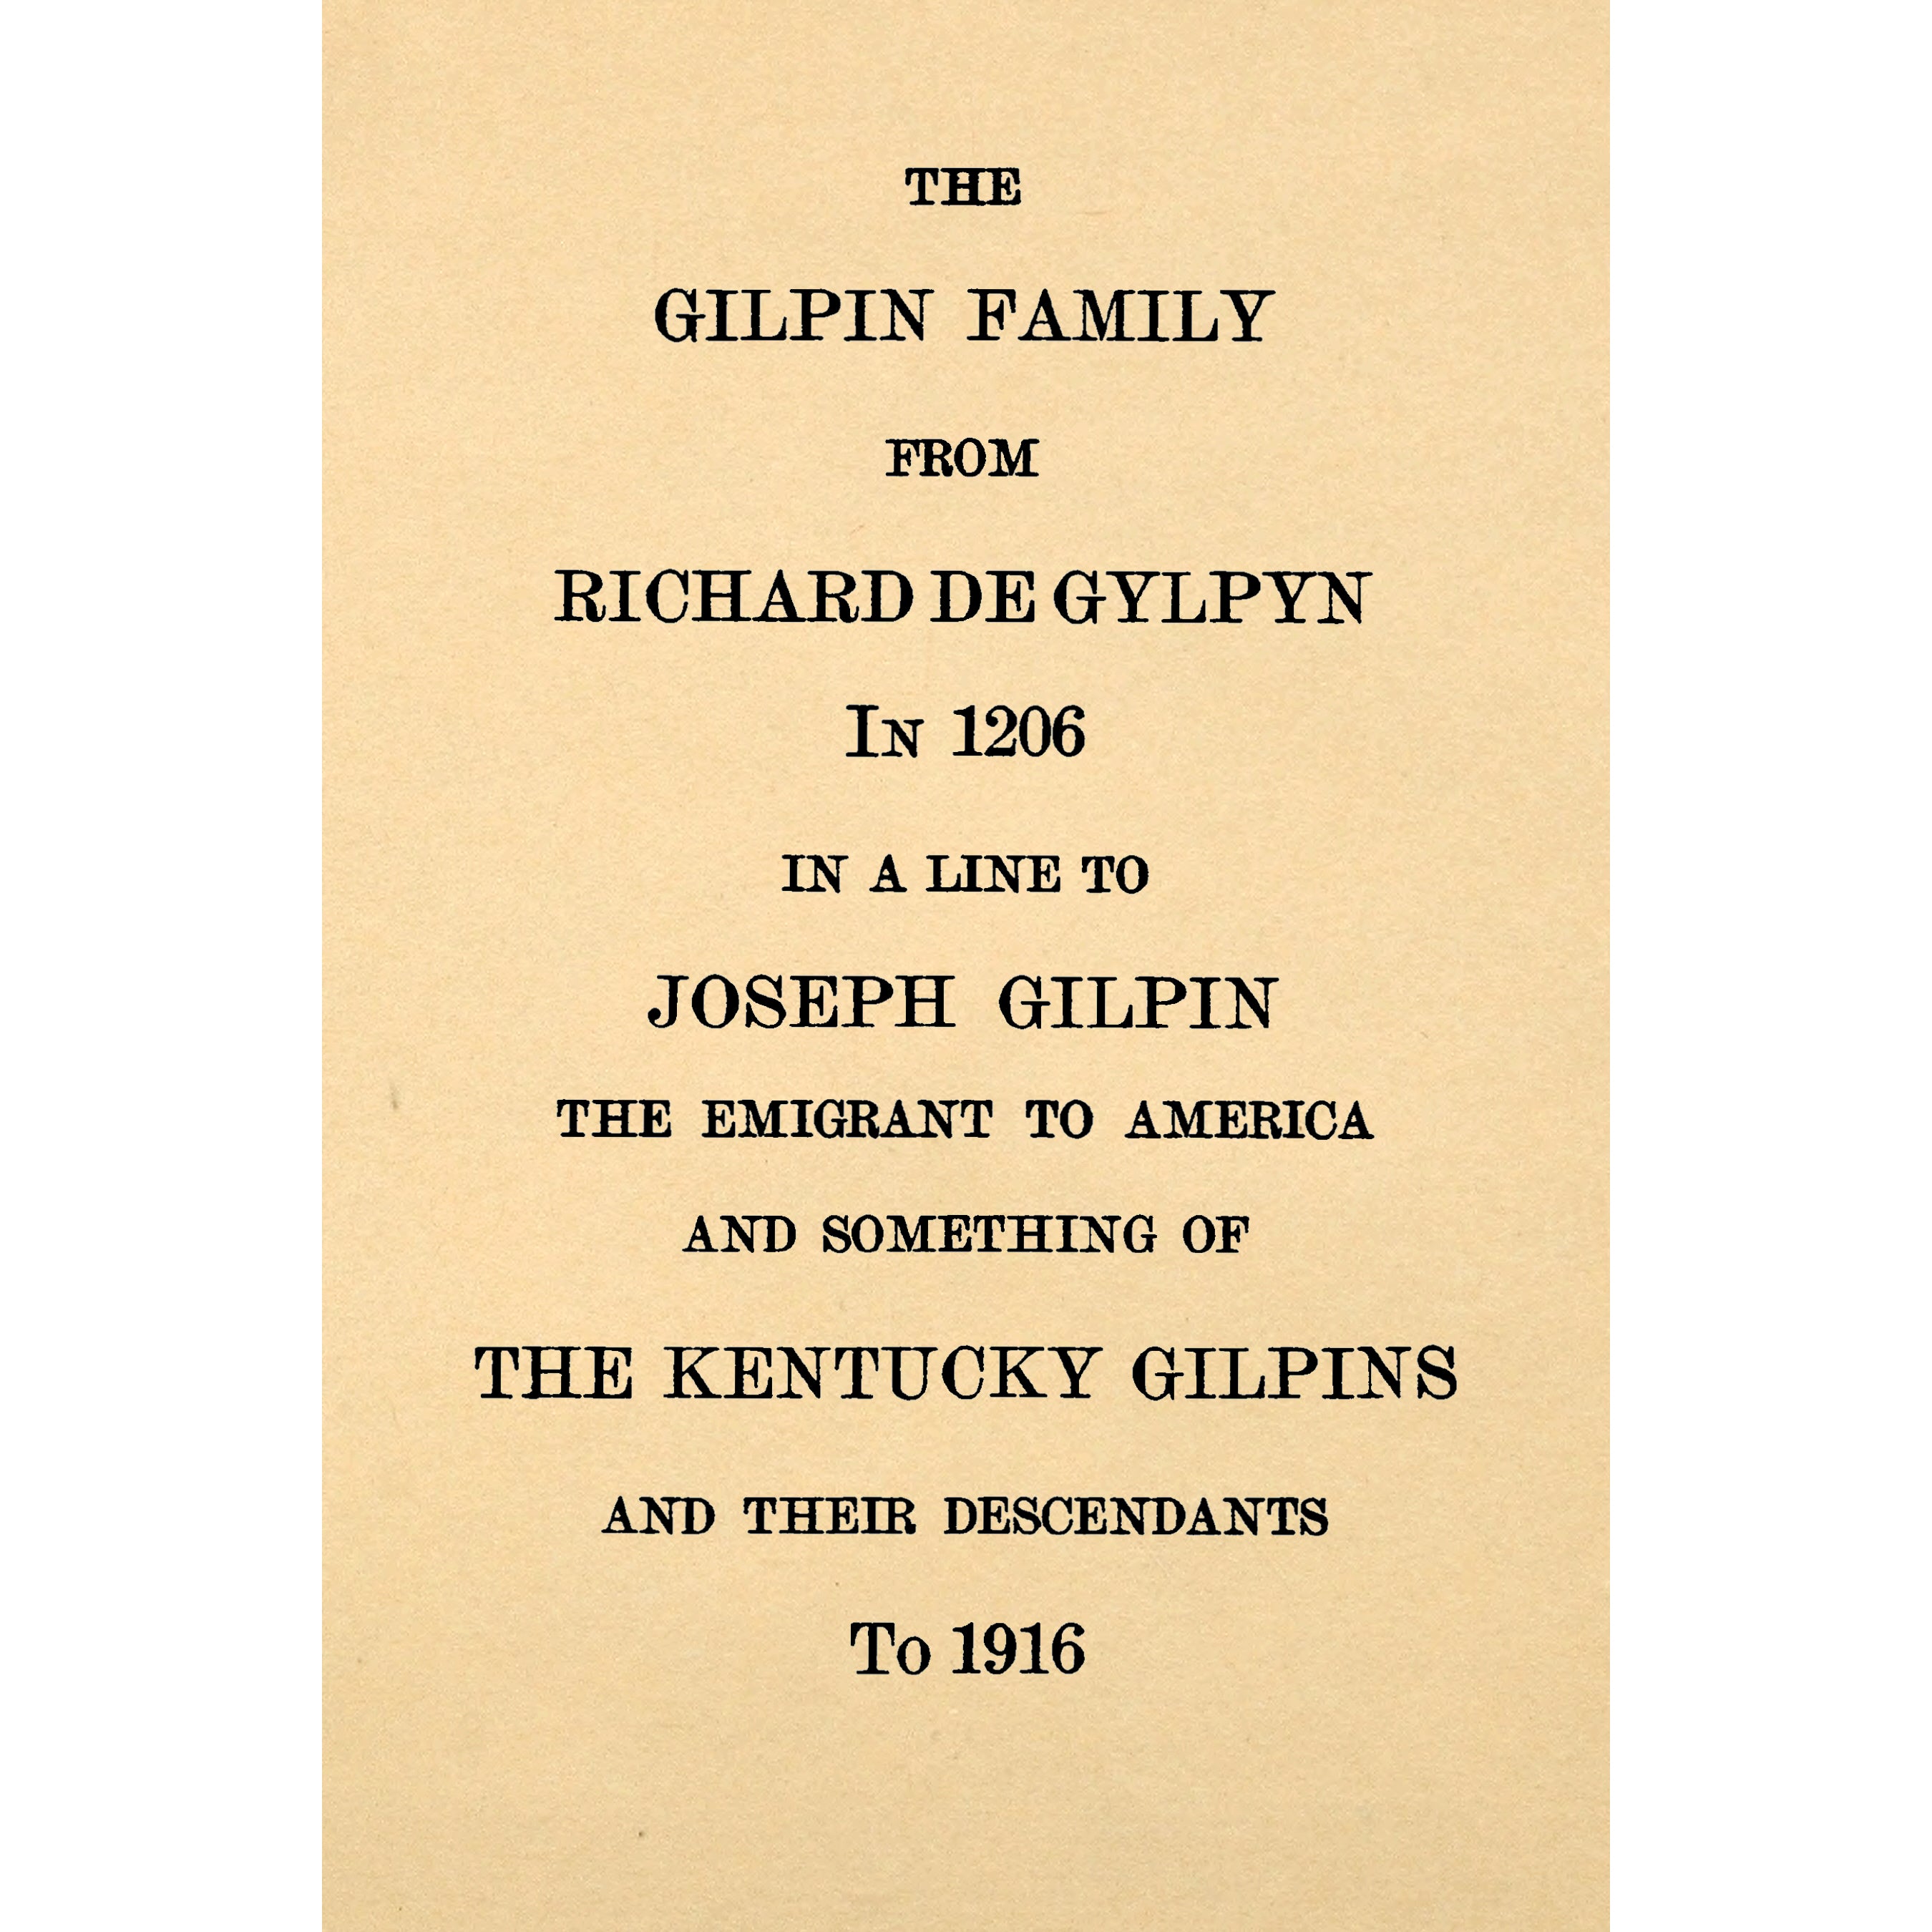 The Gilpin Family From Richard De Gylpyn in 1206 in a line to Joseph Gilpin, The Emigrant to America